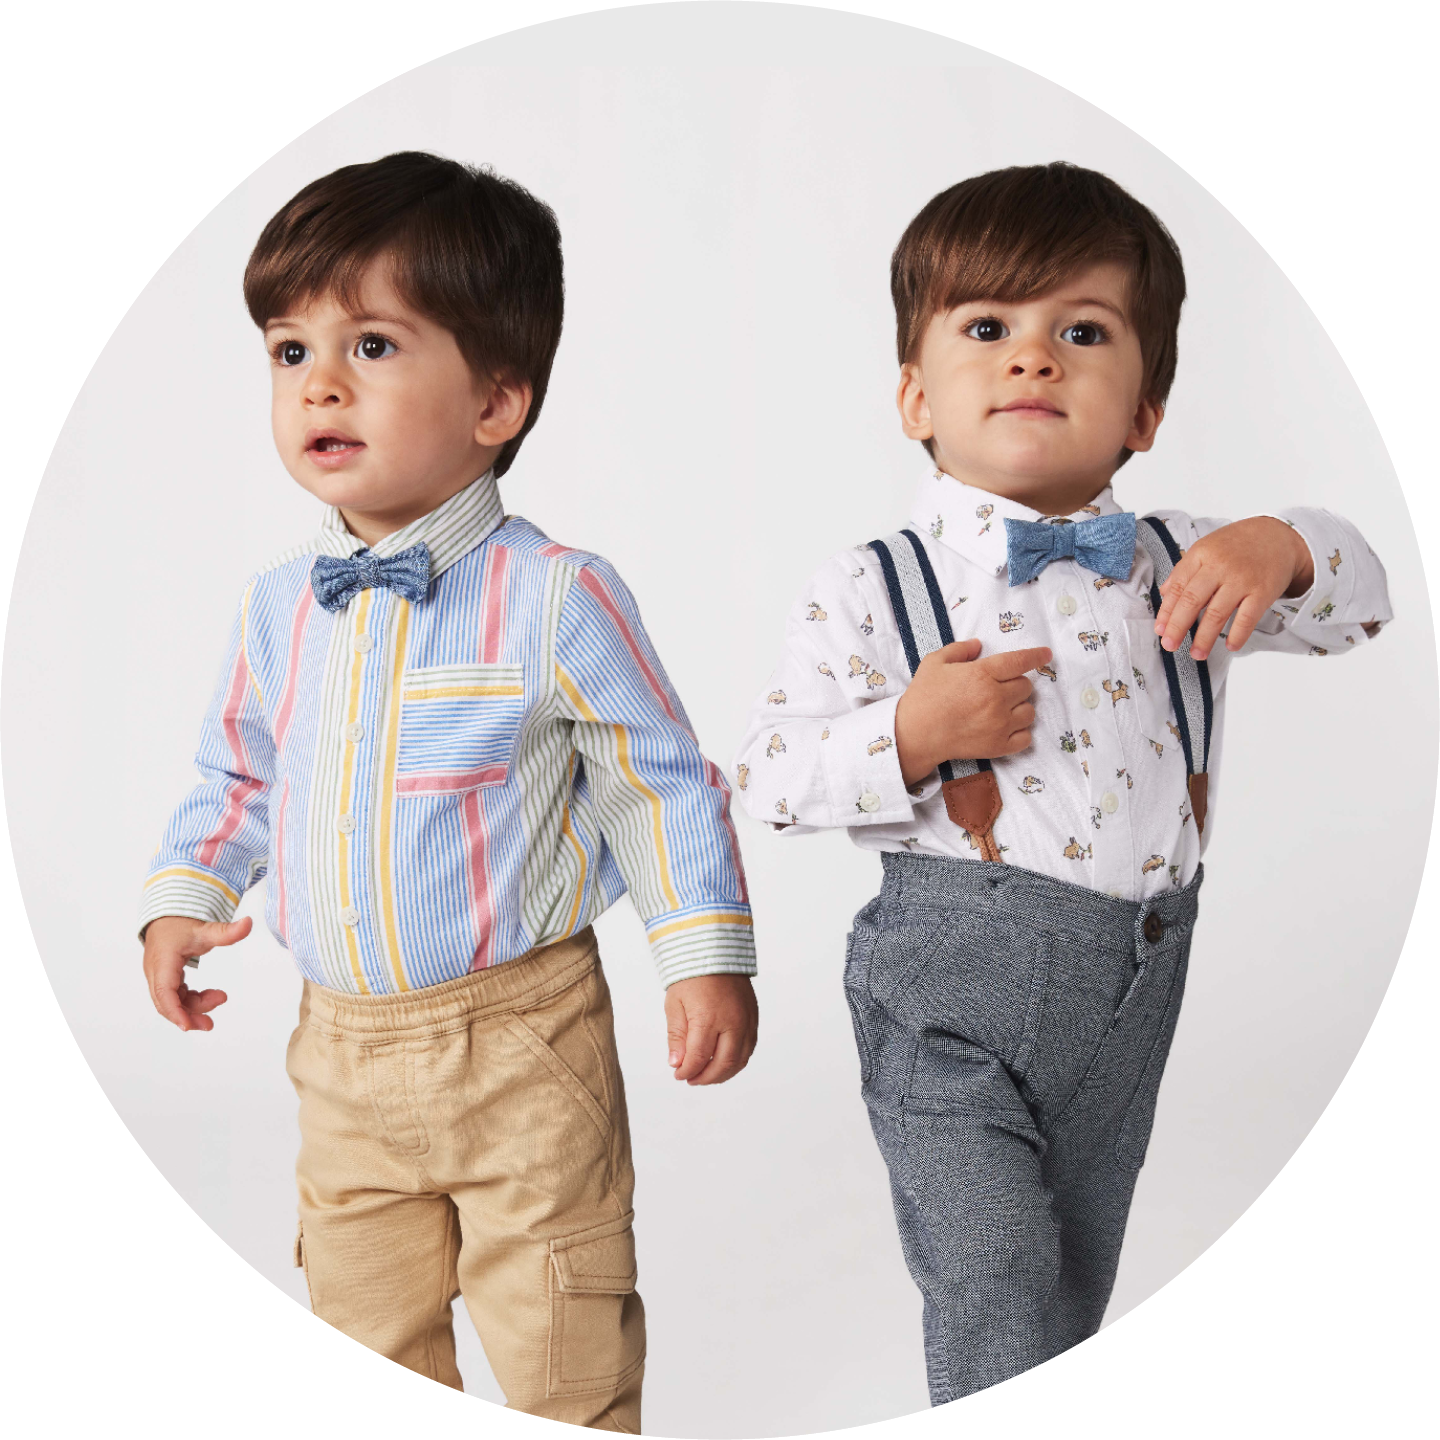 Amazon.in: Matching Family Clothing